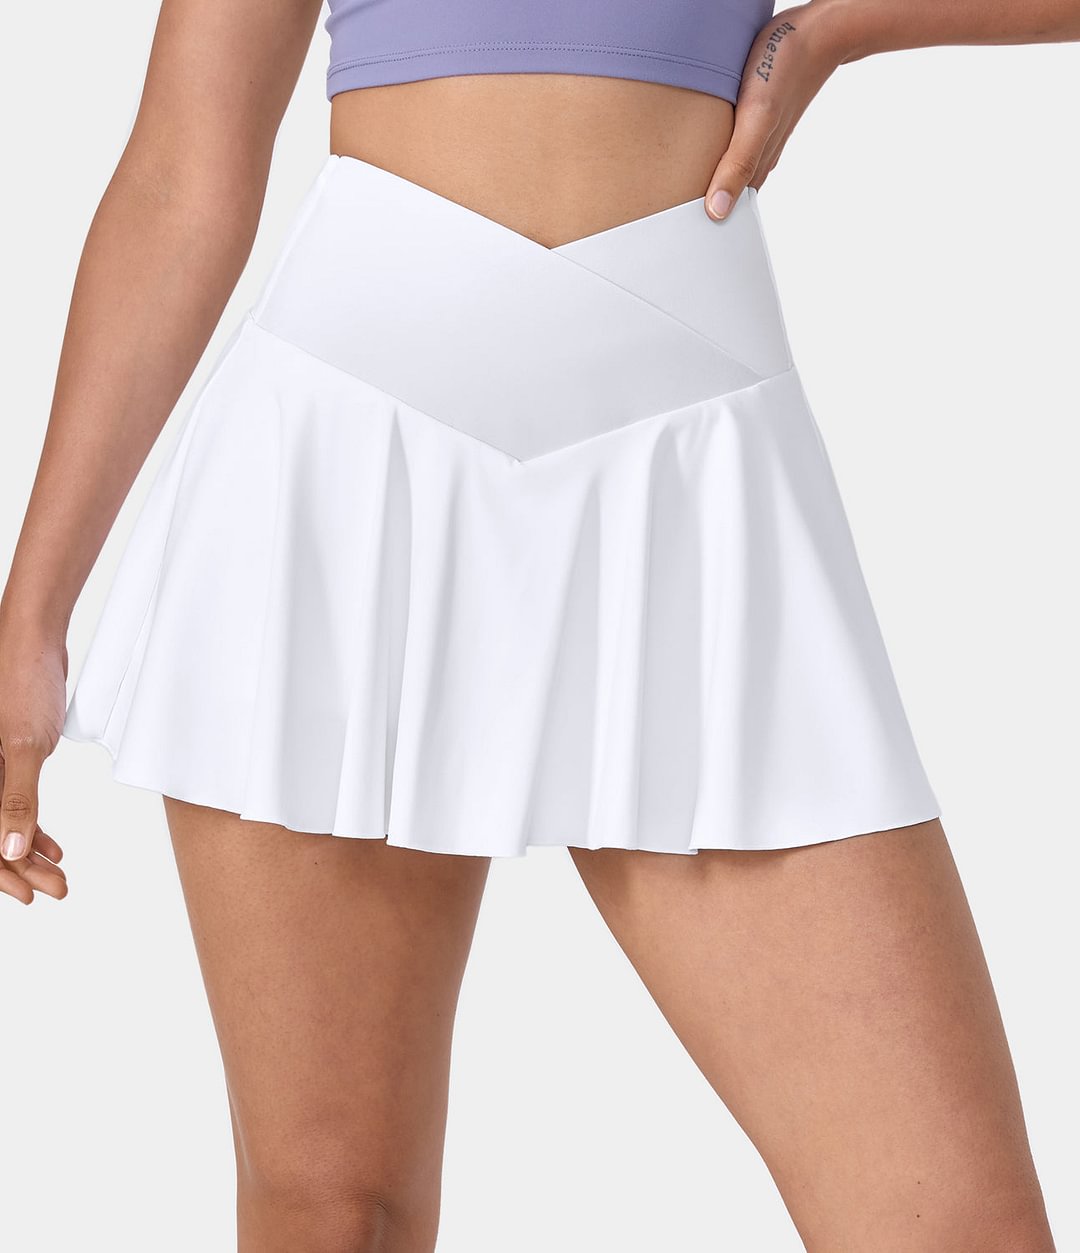 Cloudful® Air High Waisted Crossover 2-in-1 Side Pocket Flare Tennis Skirt